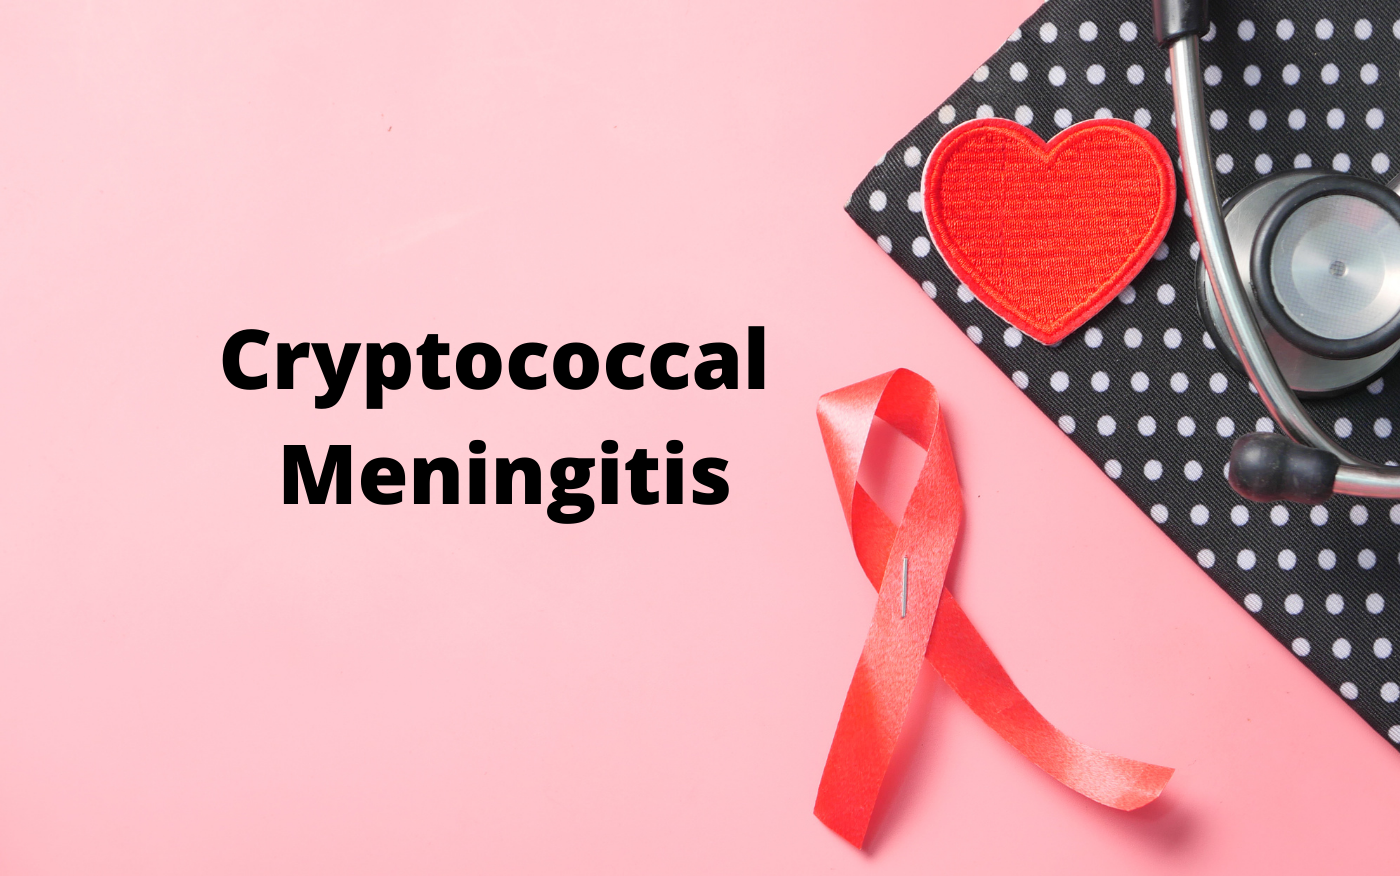 Gilead monopoly blocks cryptococcal meningitis treatment for people living with HIV